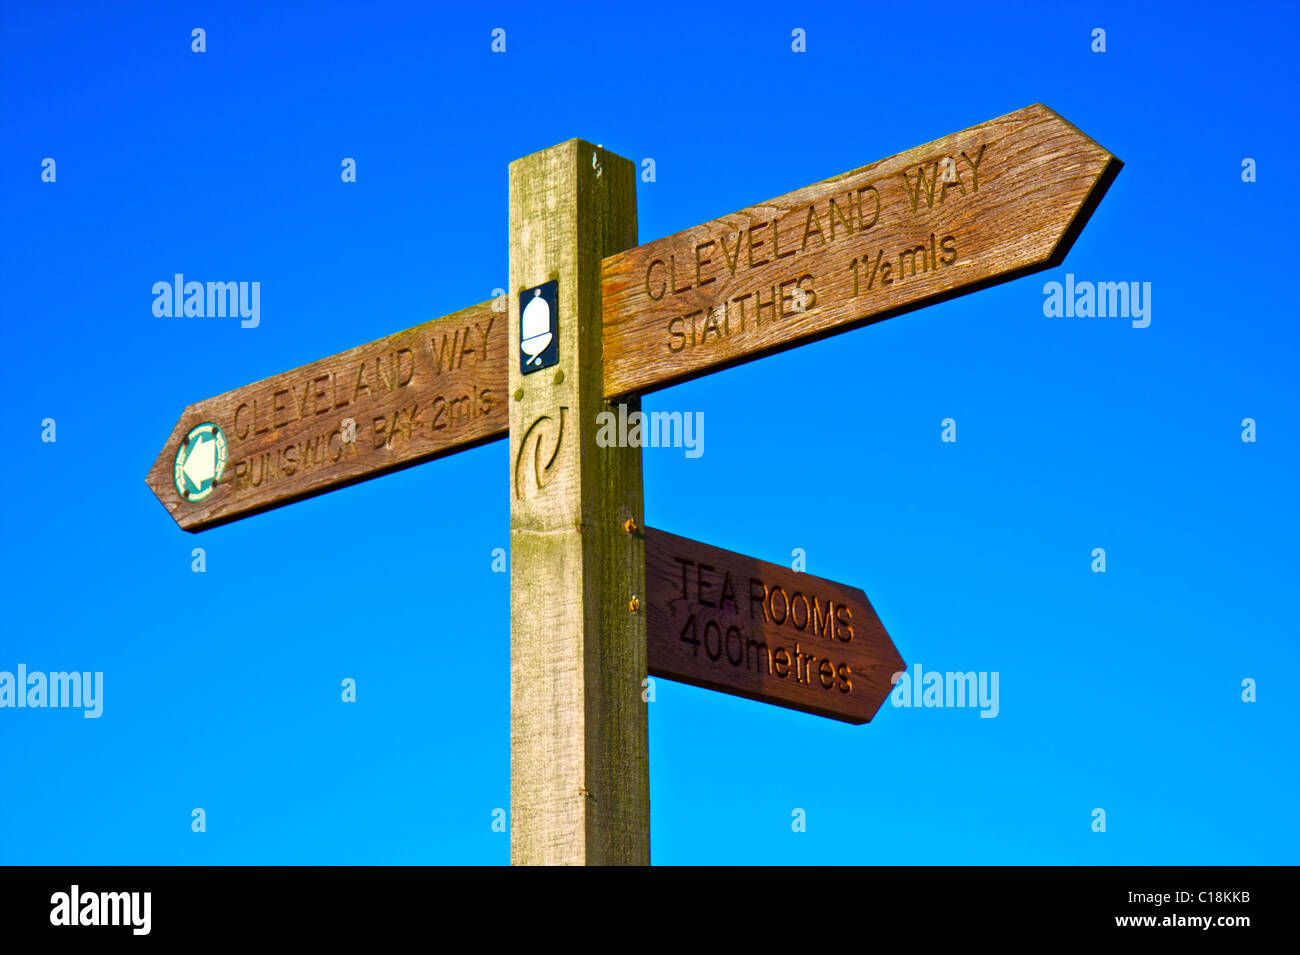 Wooden sign post set against a blue sky, located along the Cleveland Way, North Yorkshire, England UK Stock Photo